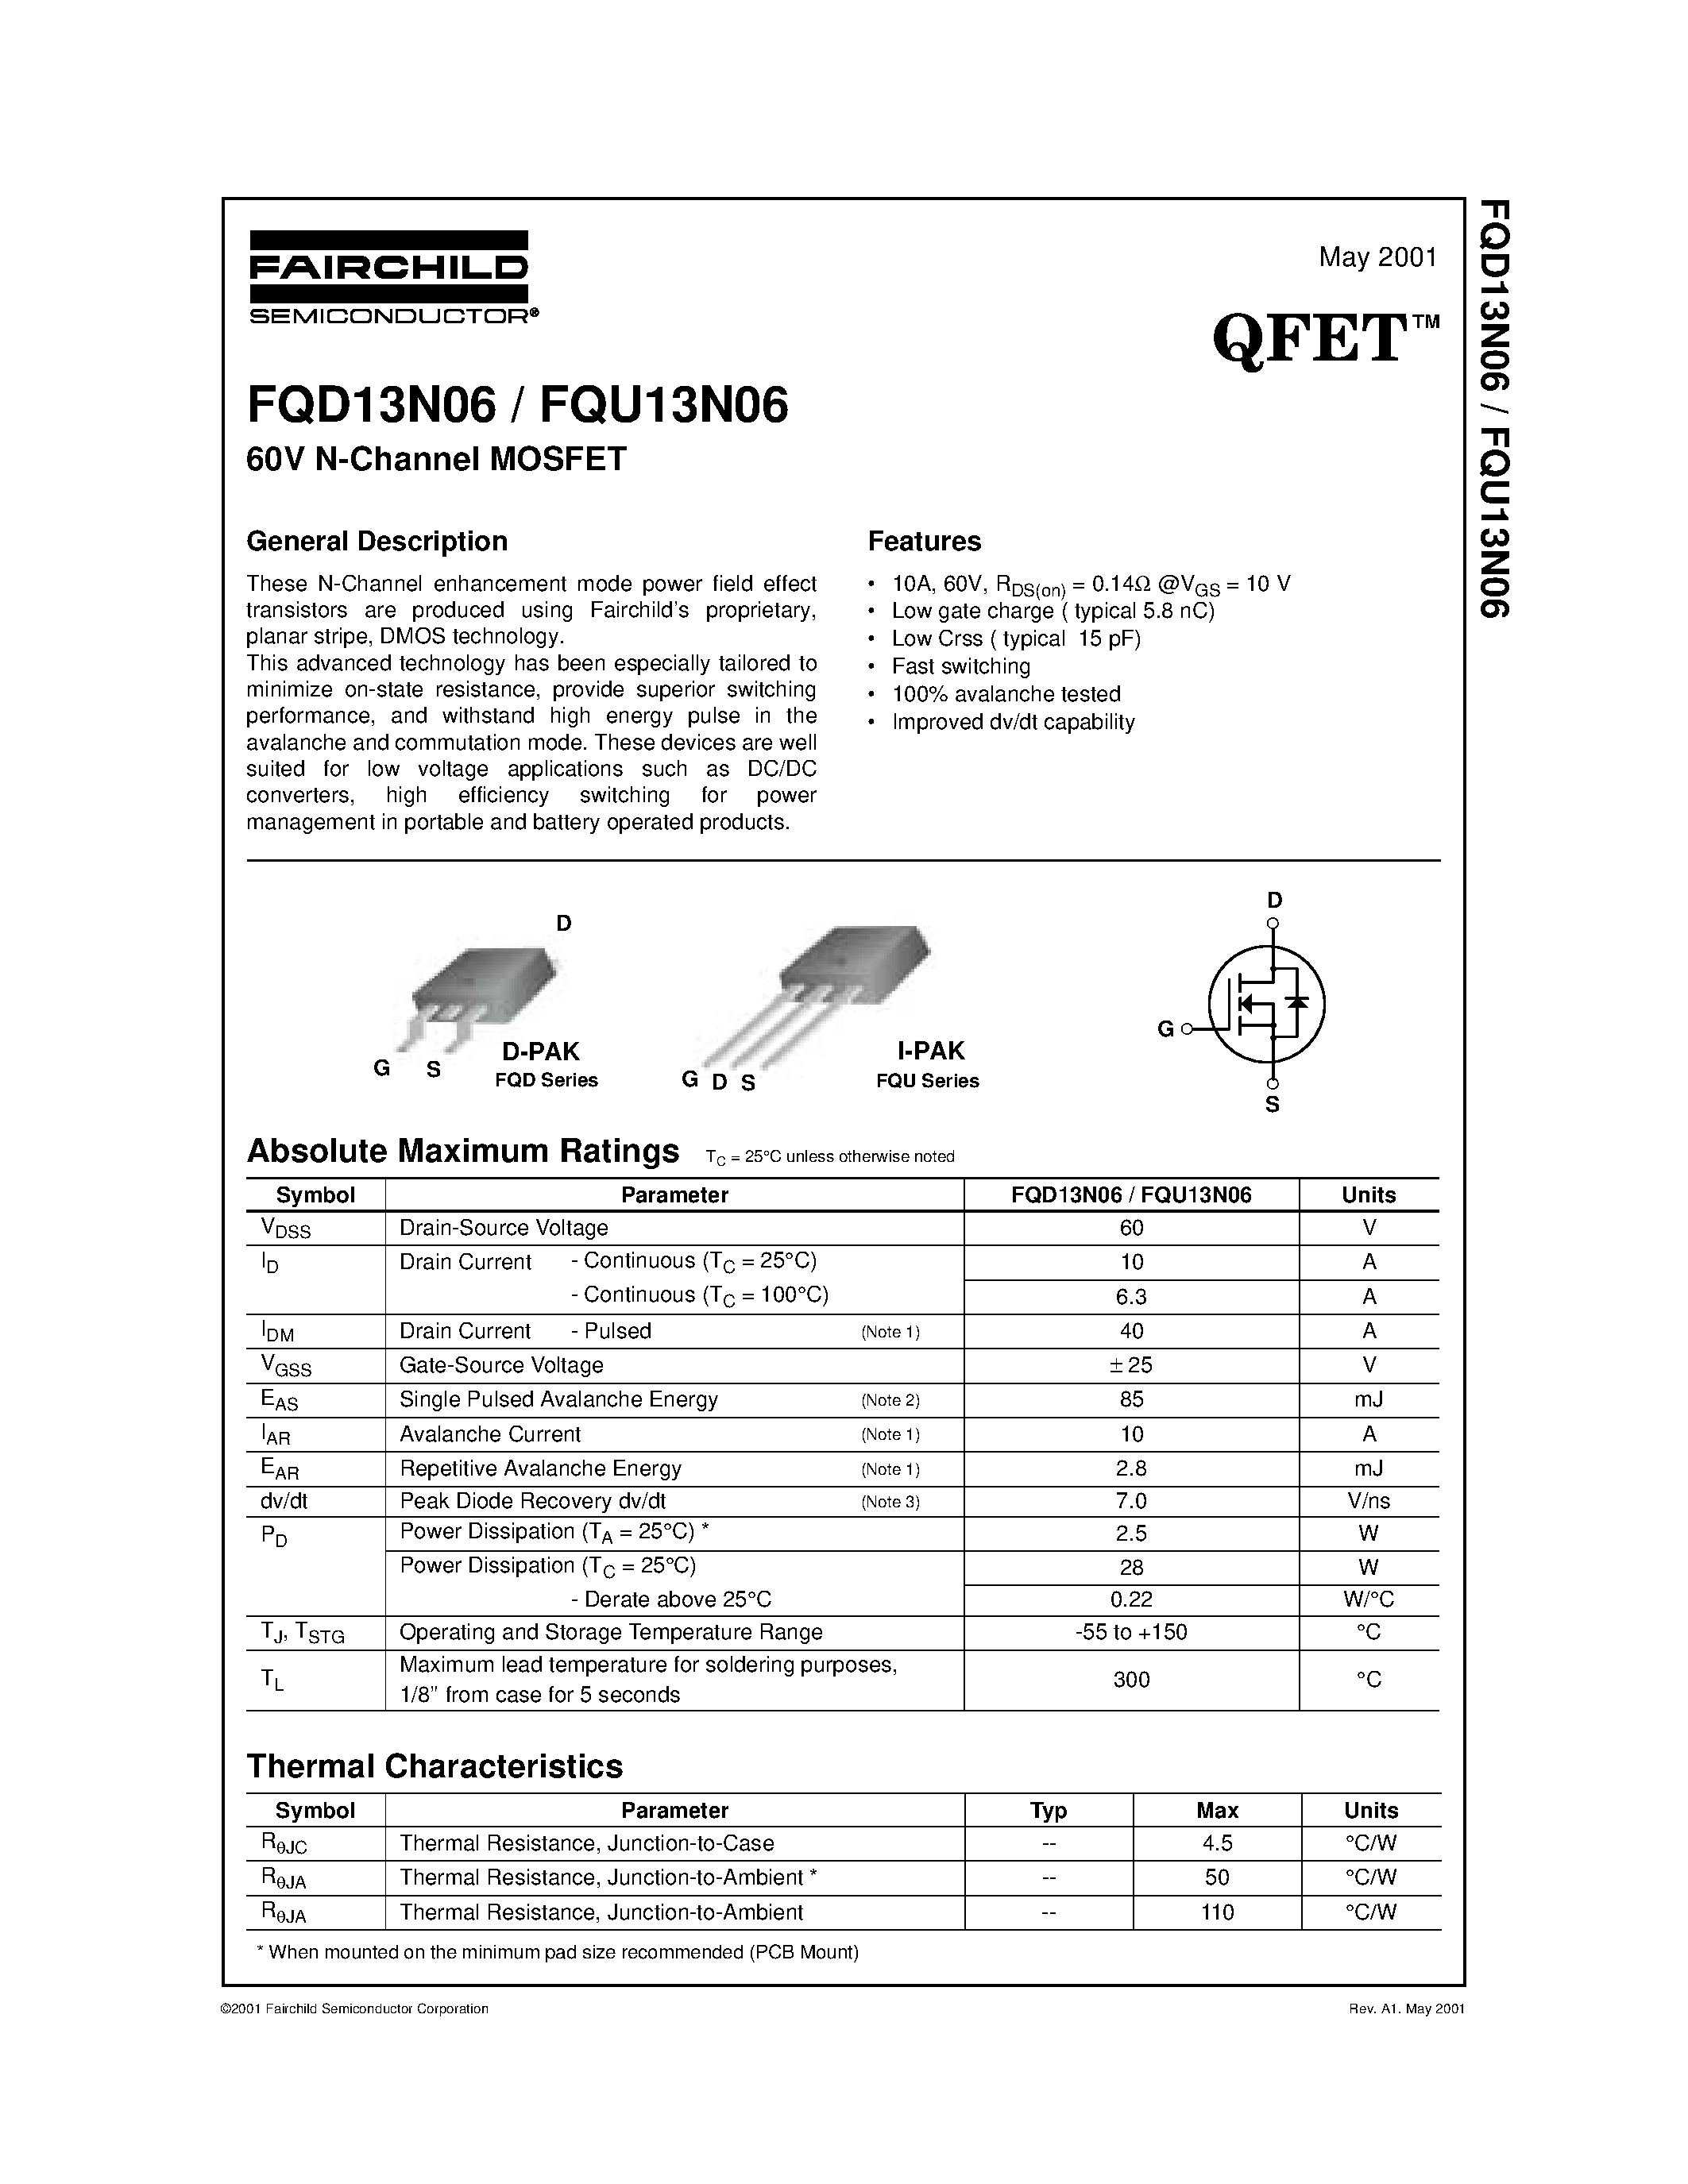 Datasheet FQD13N06 - 60V N-Channel MOSFET page 1